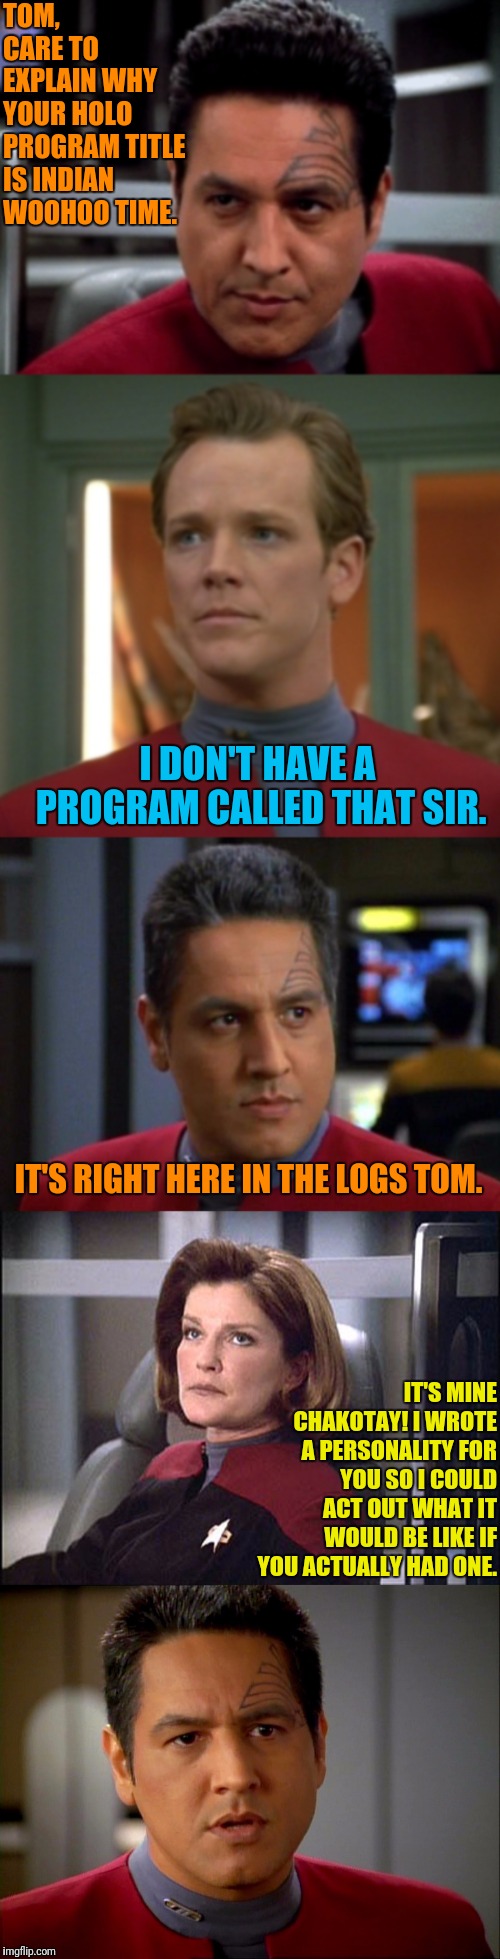 Program WooHoo | TOM, CARE TO EXPLAIN WHY YOUR HOLO PROGRAM TITLE IS INDIAN WOOHOO TIME. I DON'T HAVE A PROGRAM CALLED THAT SIR. IT'S RIGHT HERE IN THE LOGS TOM. IT'S MINE CHAKOTAY! I WROTE A PERSONALITY FOR YOU SO I COULD ACT OUT WHAT IT WOULD BE LIKE IF YOU ACTUALLY HAD ONE. | image tagged in star trek voyager,janeway,woo,who | made w/ Imgflip meme maker